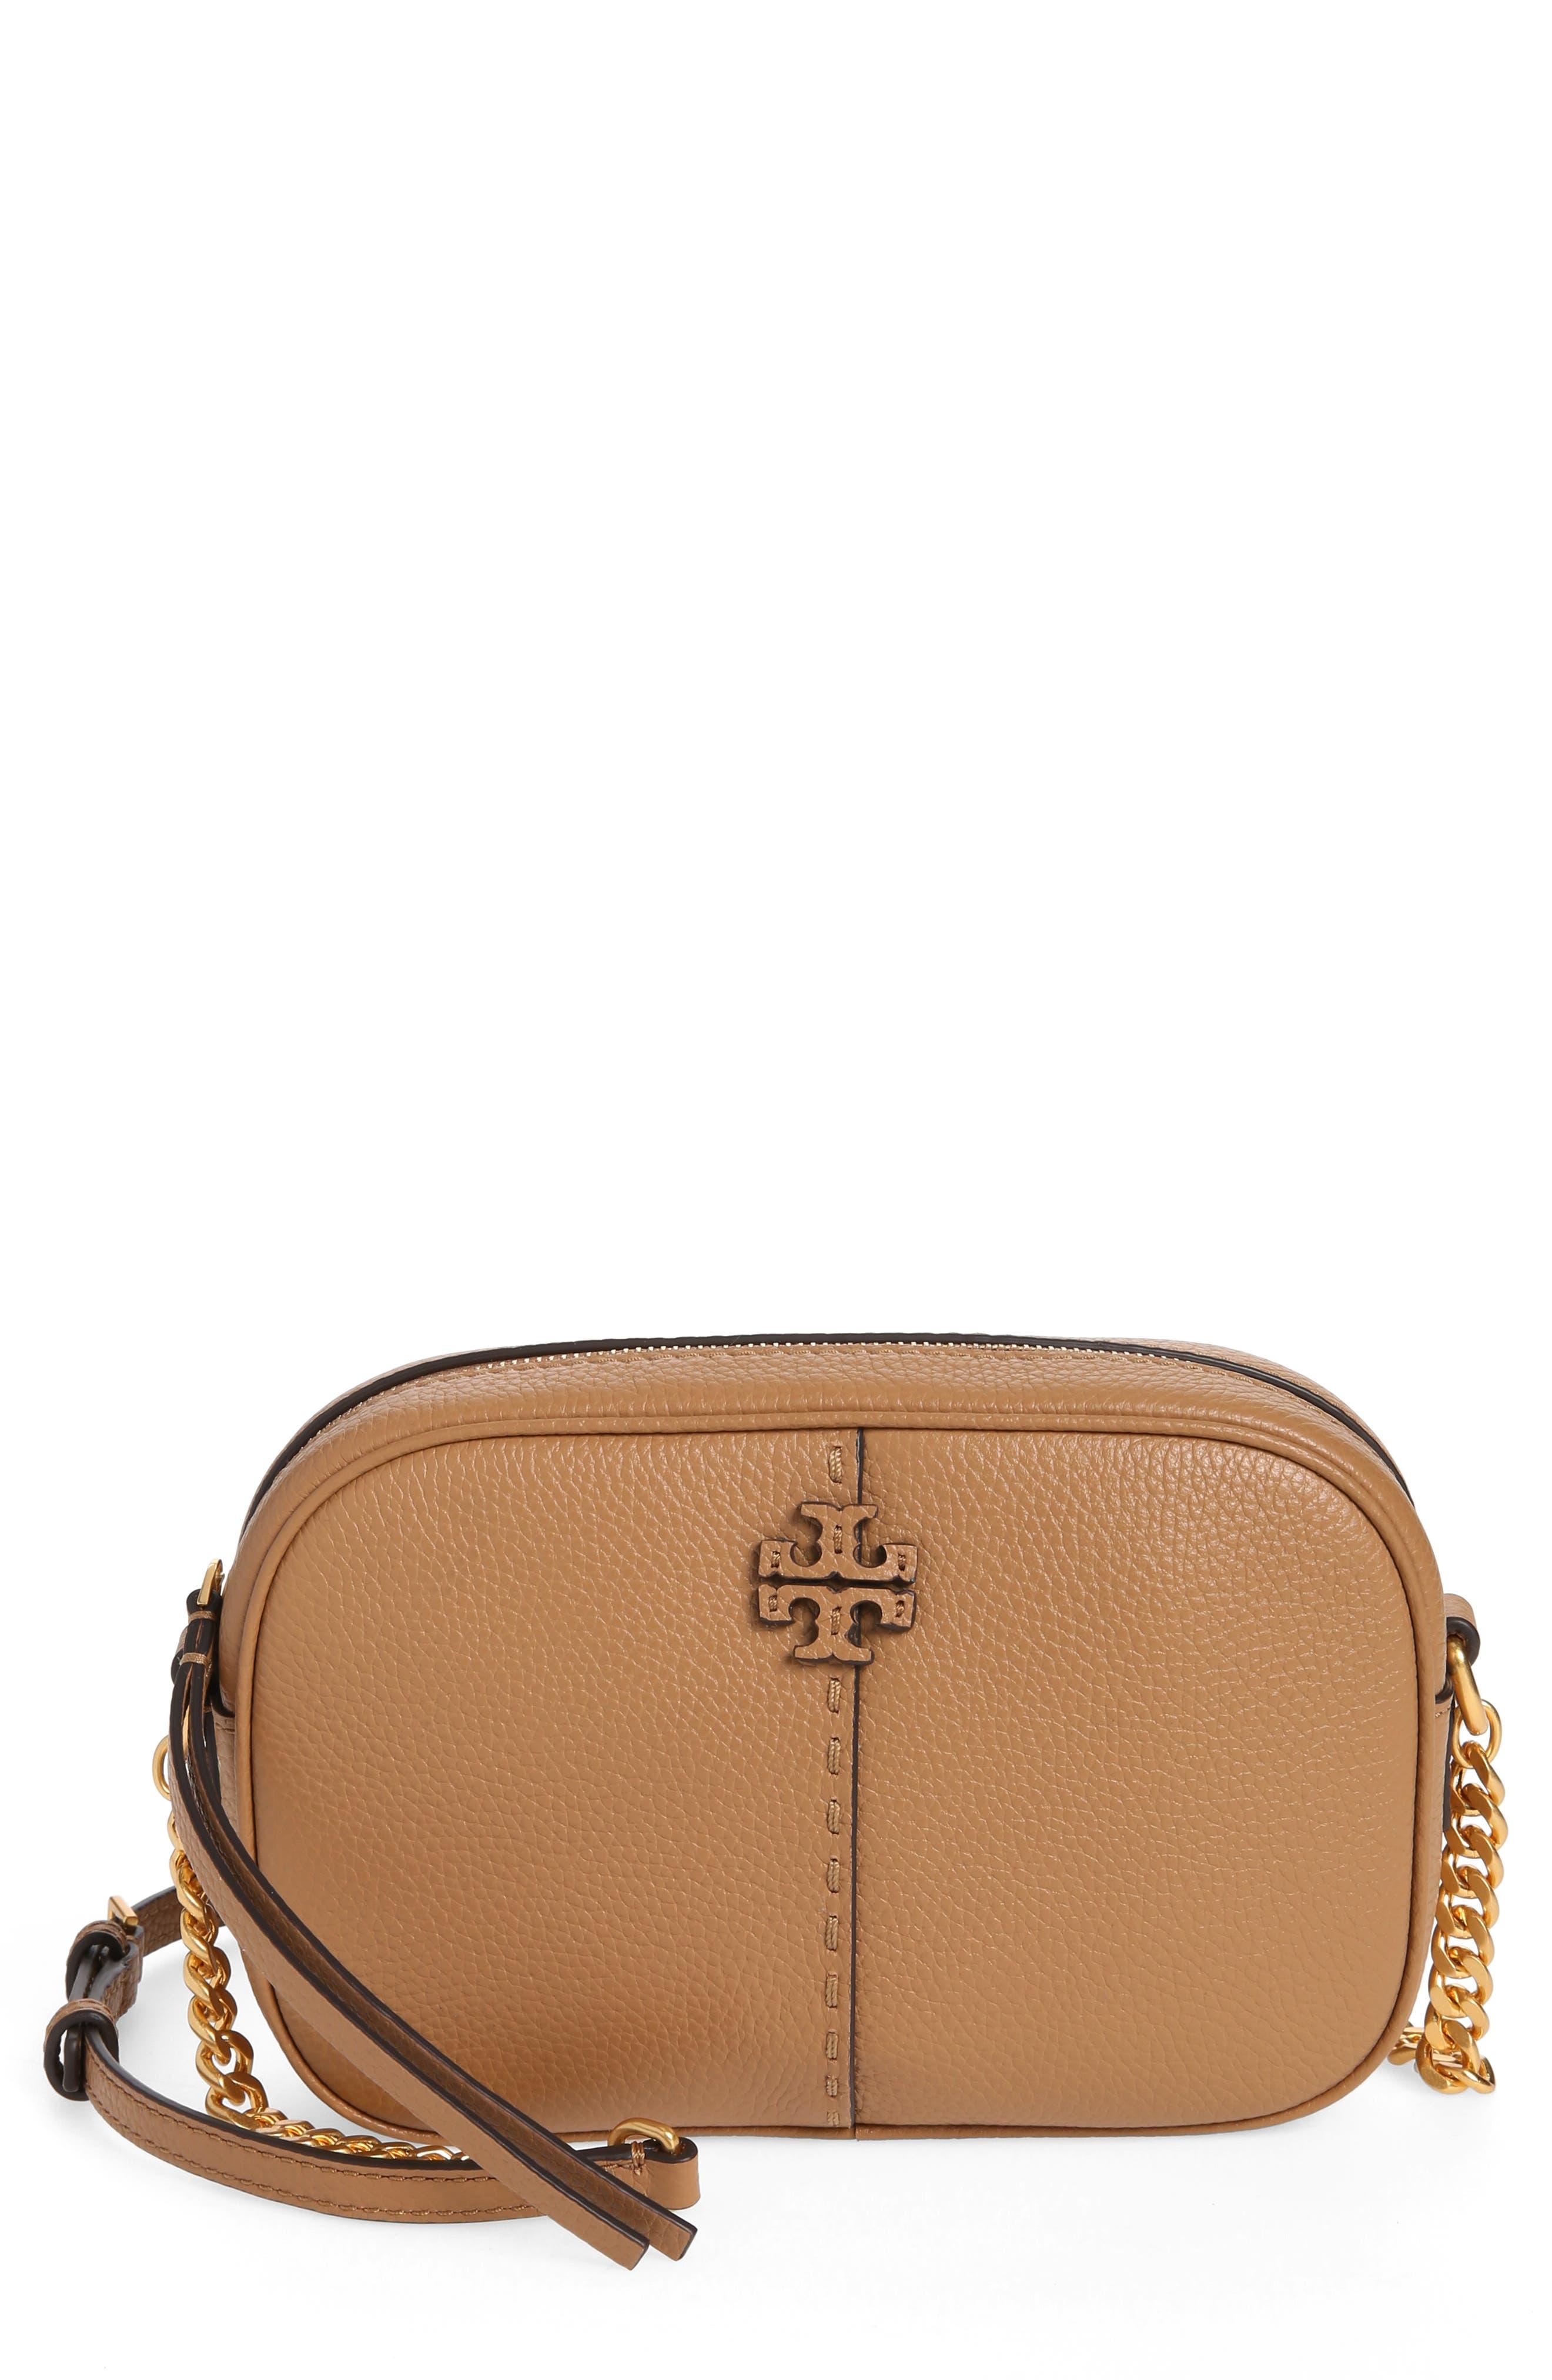 Tory Burch Mcgraw Leather Camera Bag in Brown | Lyst